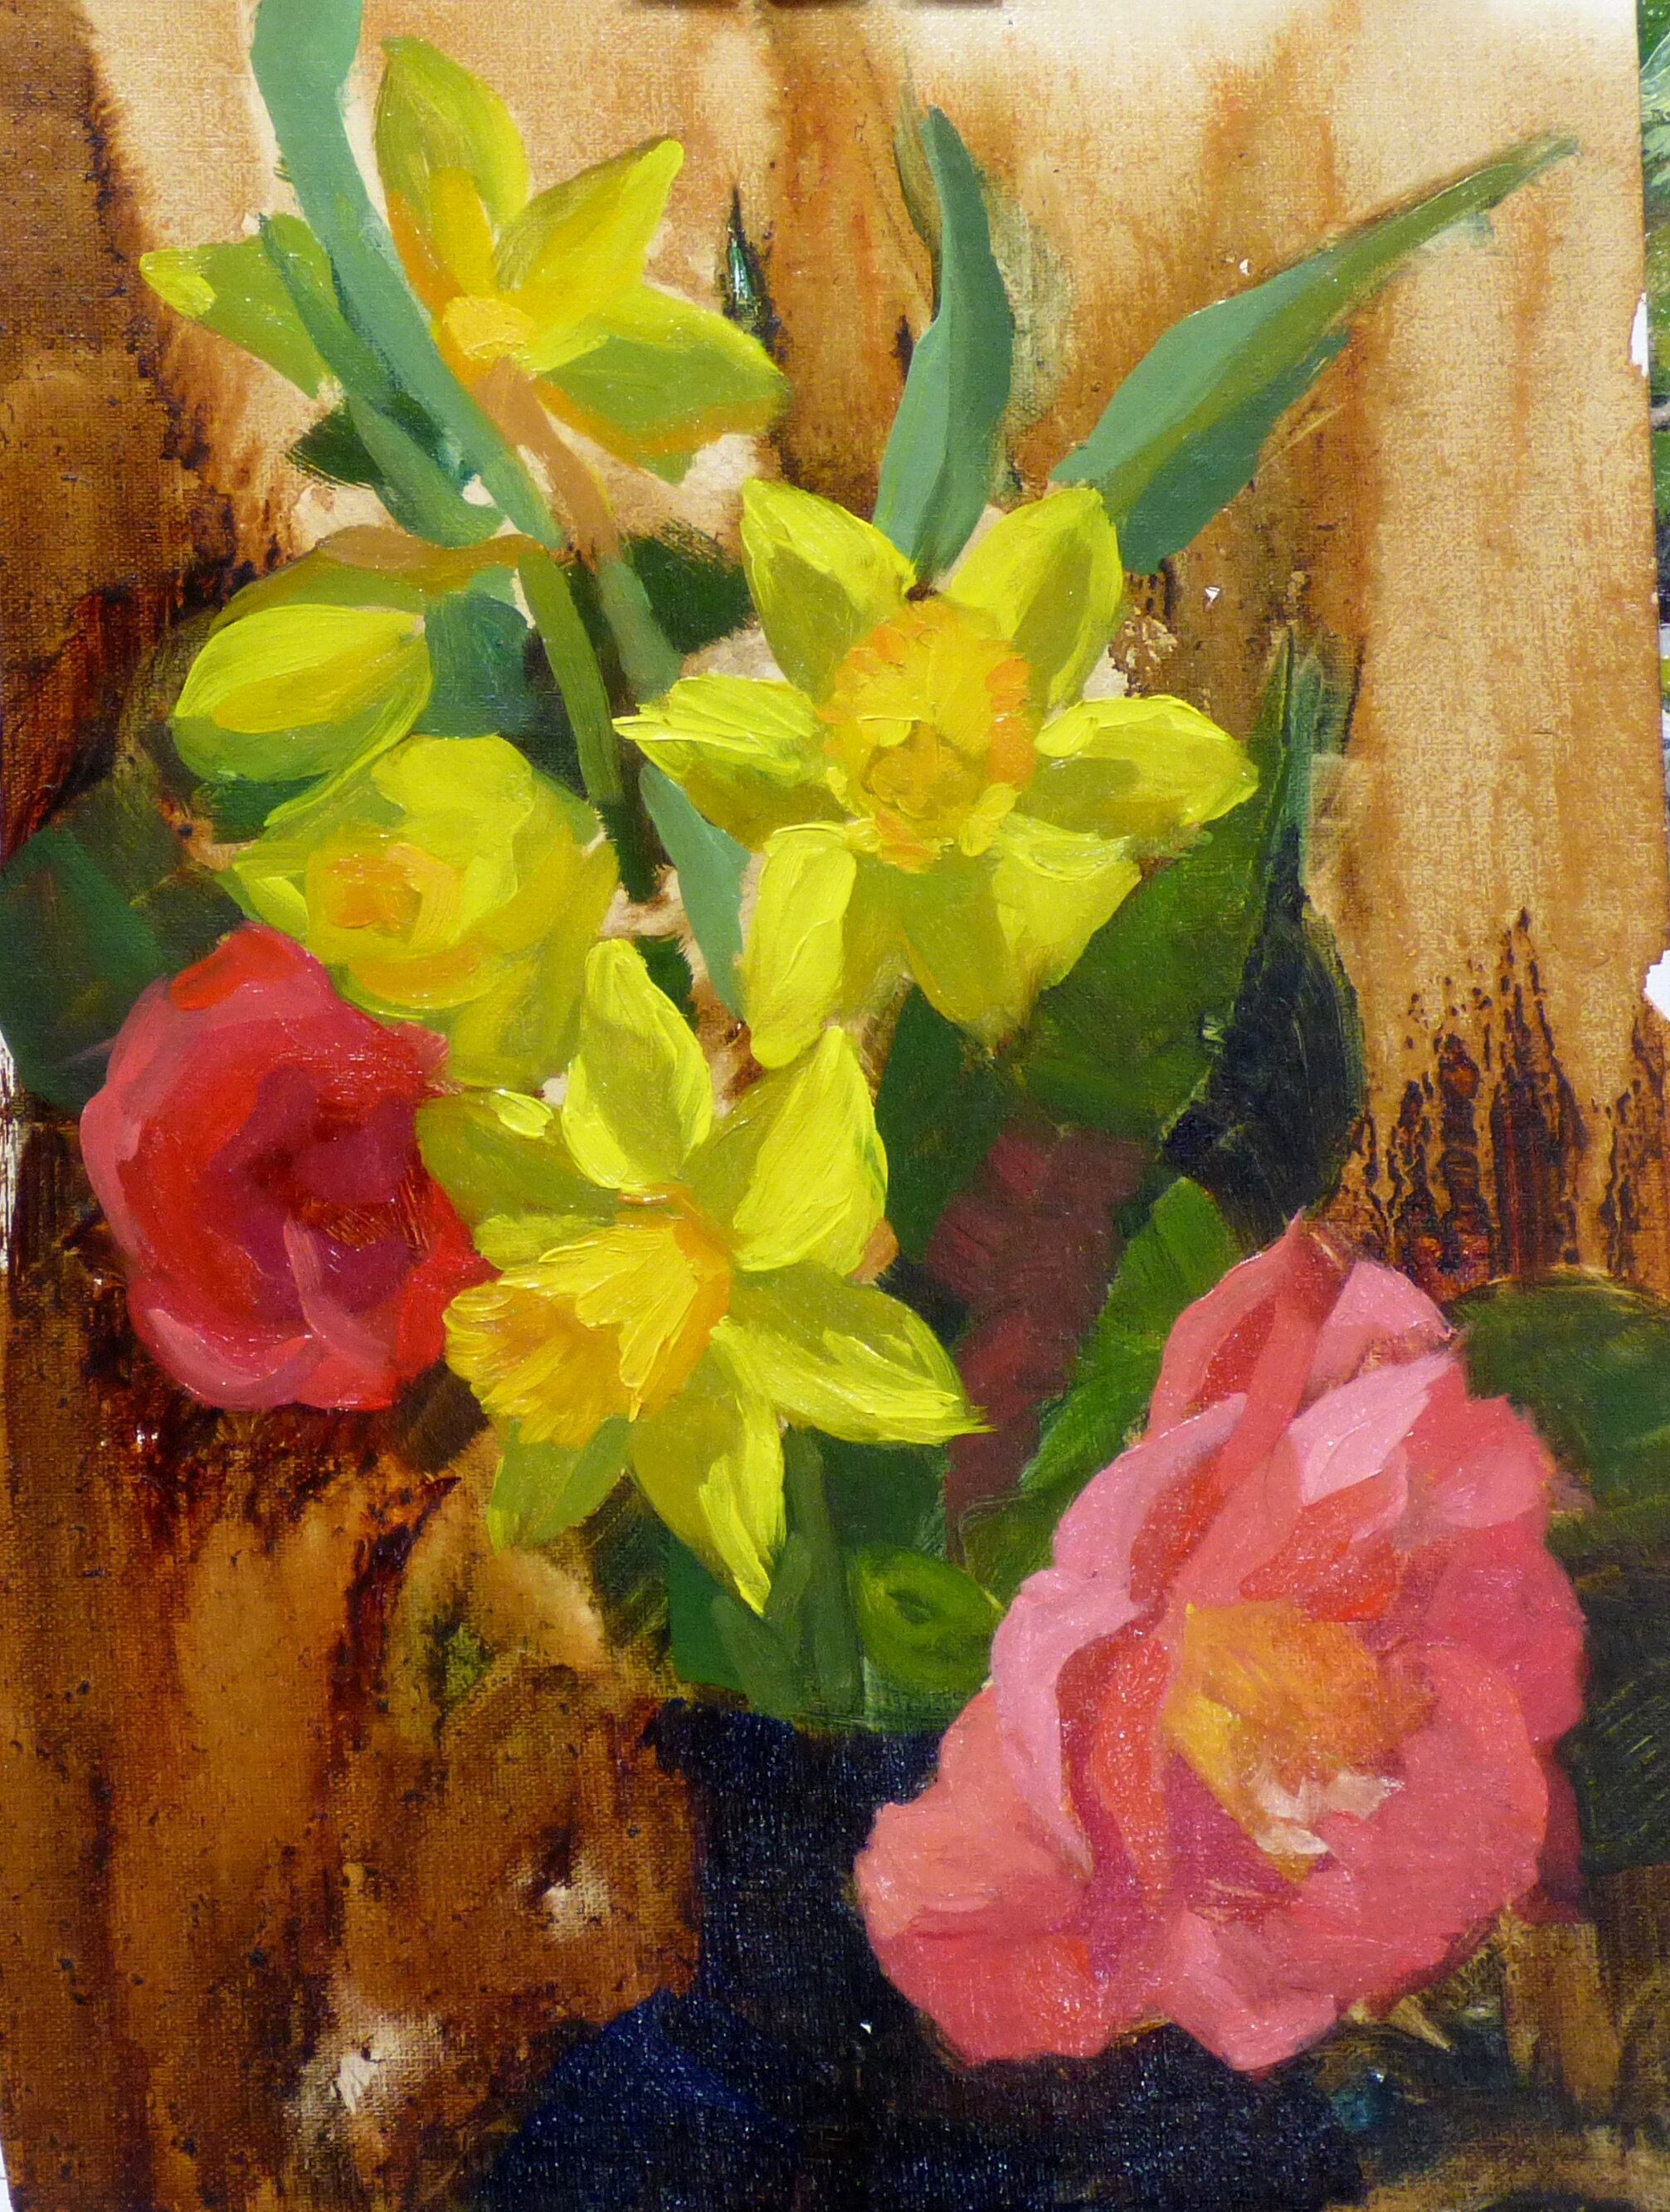 Daffodils and Camellias  $120